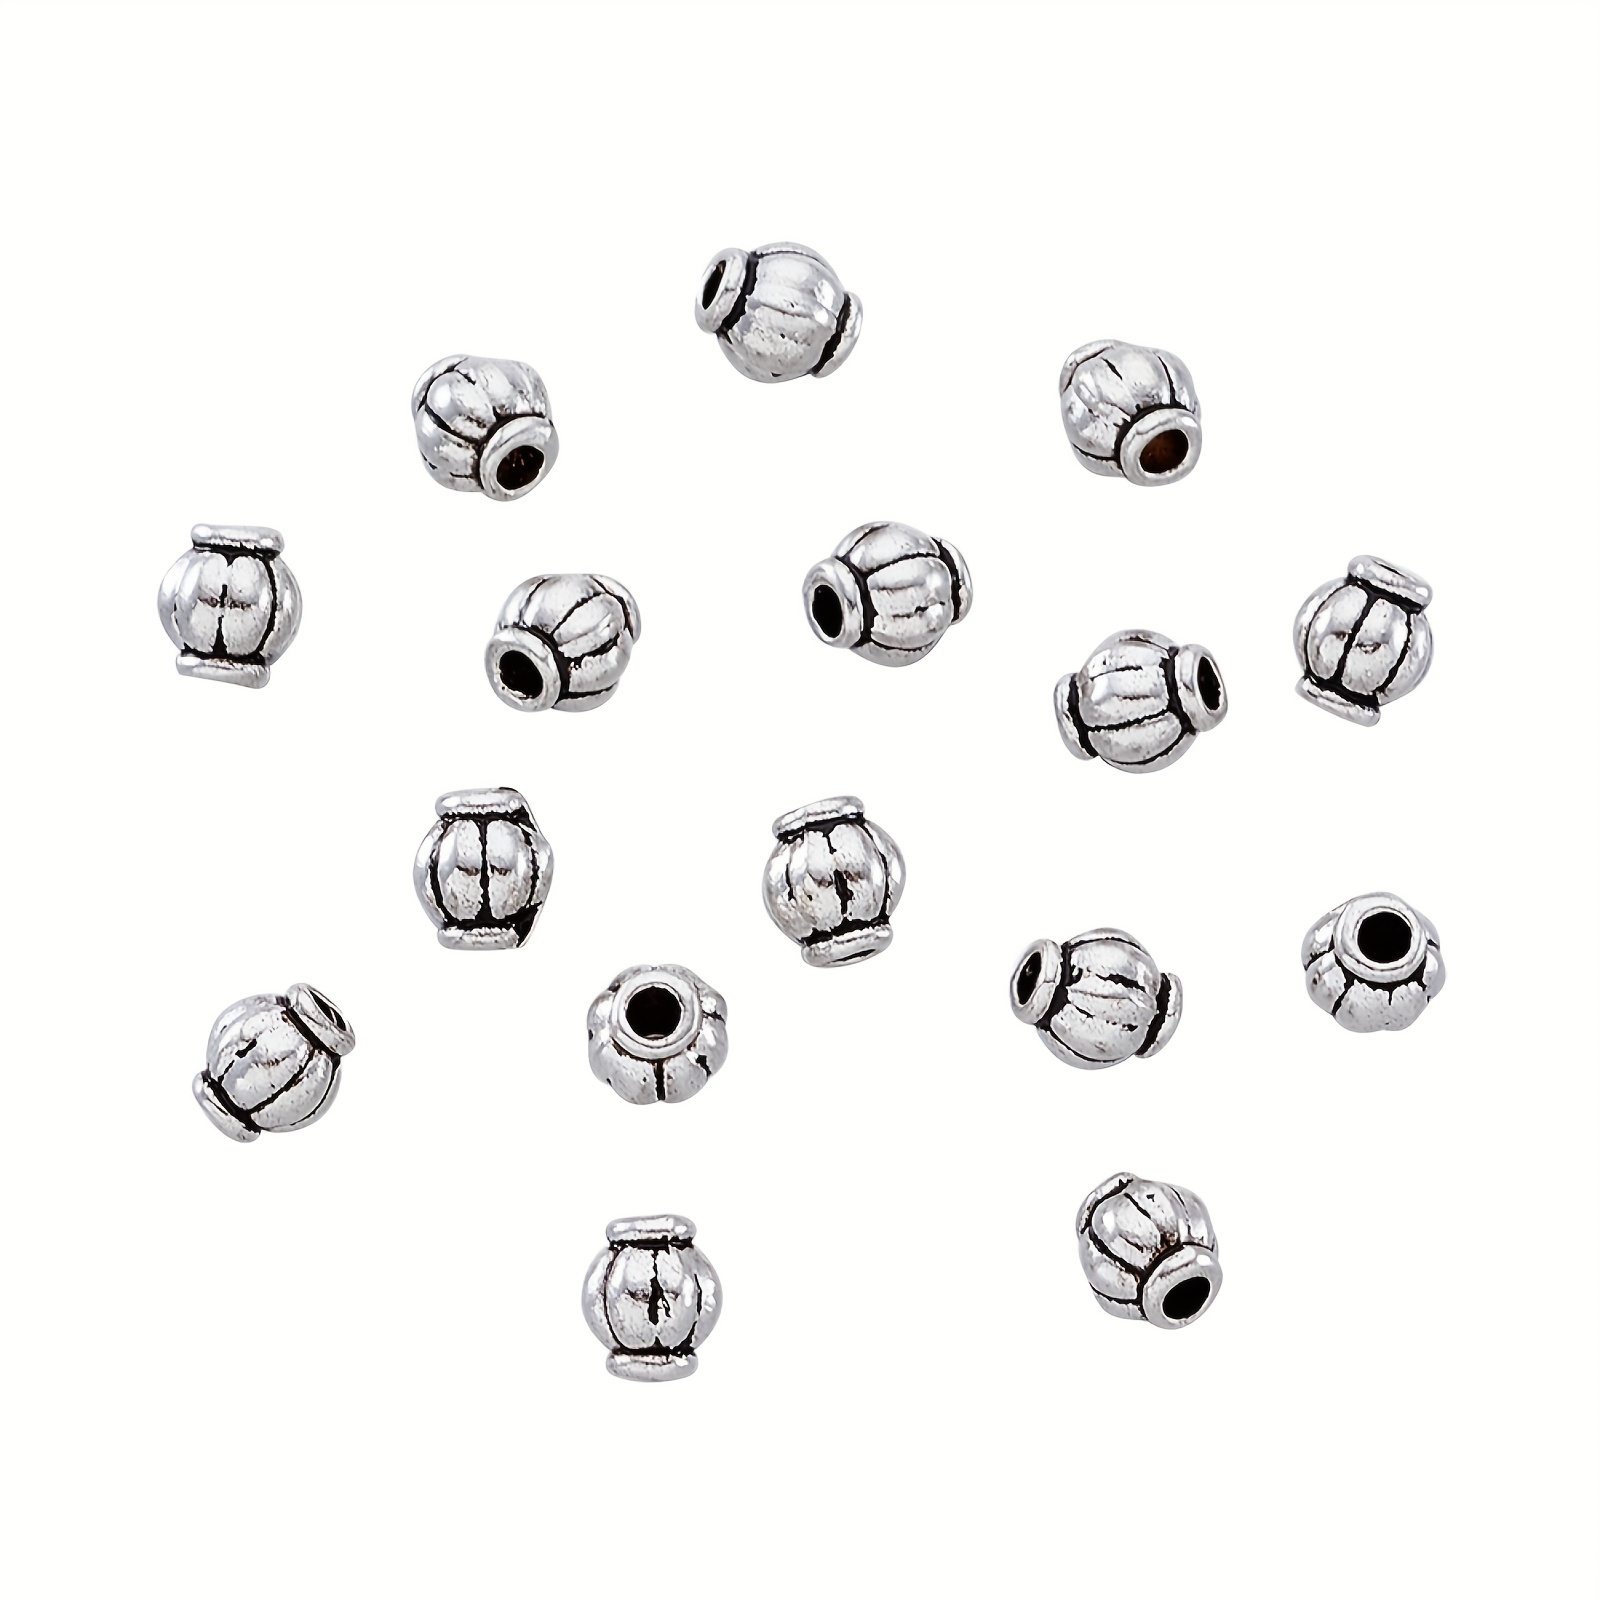 NBEADS 720 Pcs Antique Alloy Spacer Beads, Tibetan Charm Spacers